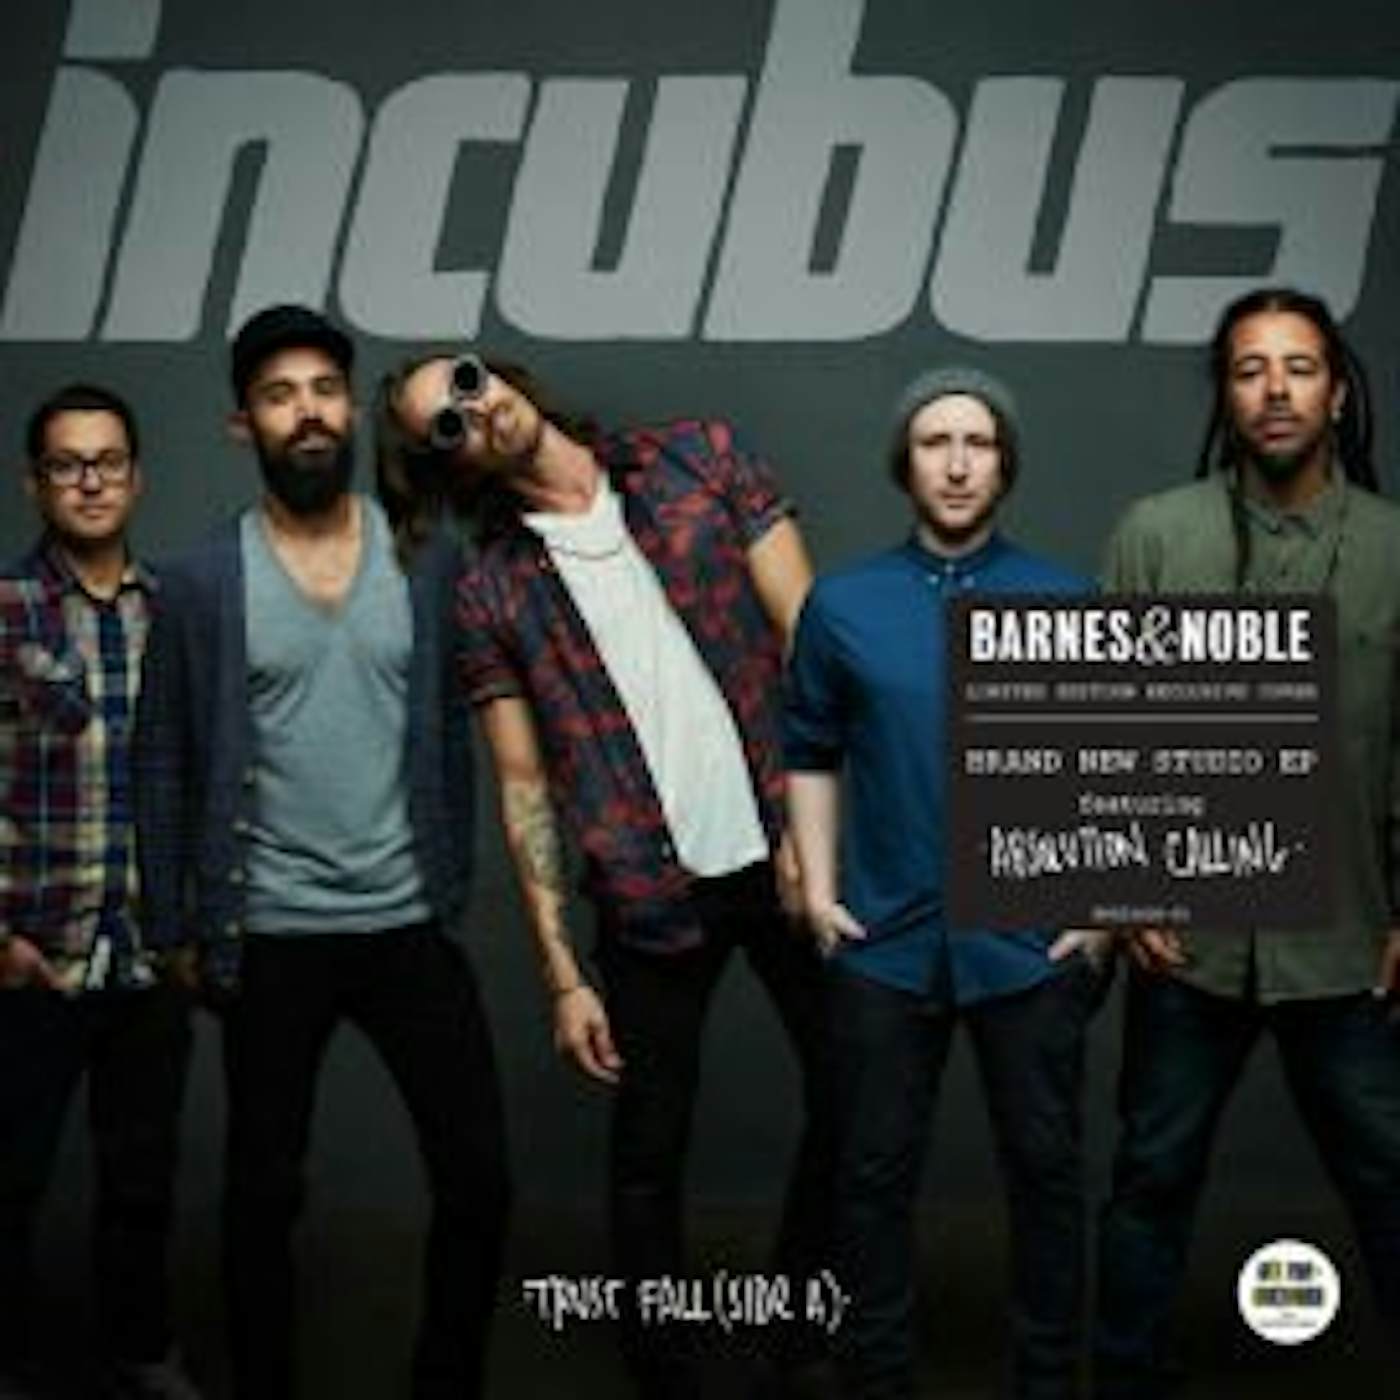 Incubus TRUST FALL (SIDE A) (BN) Vinyl Record